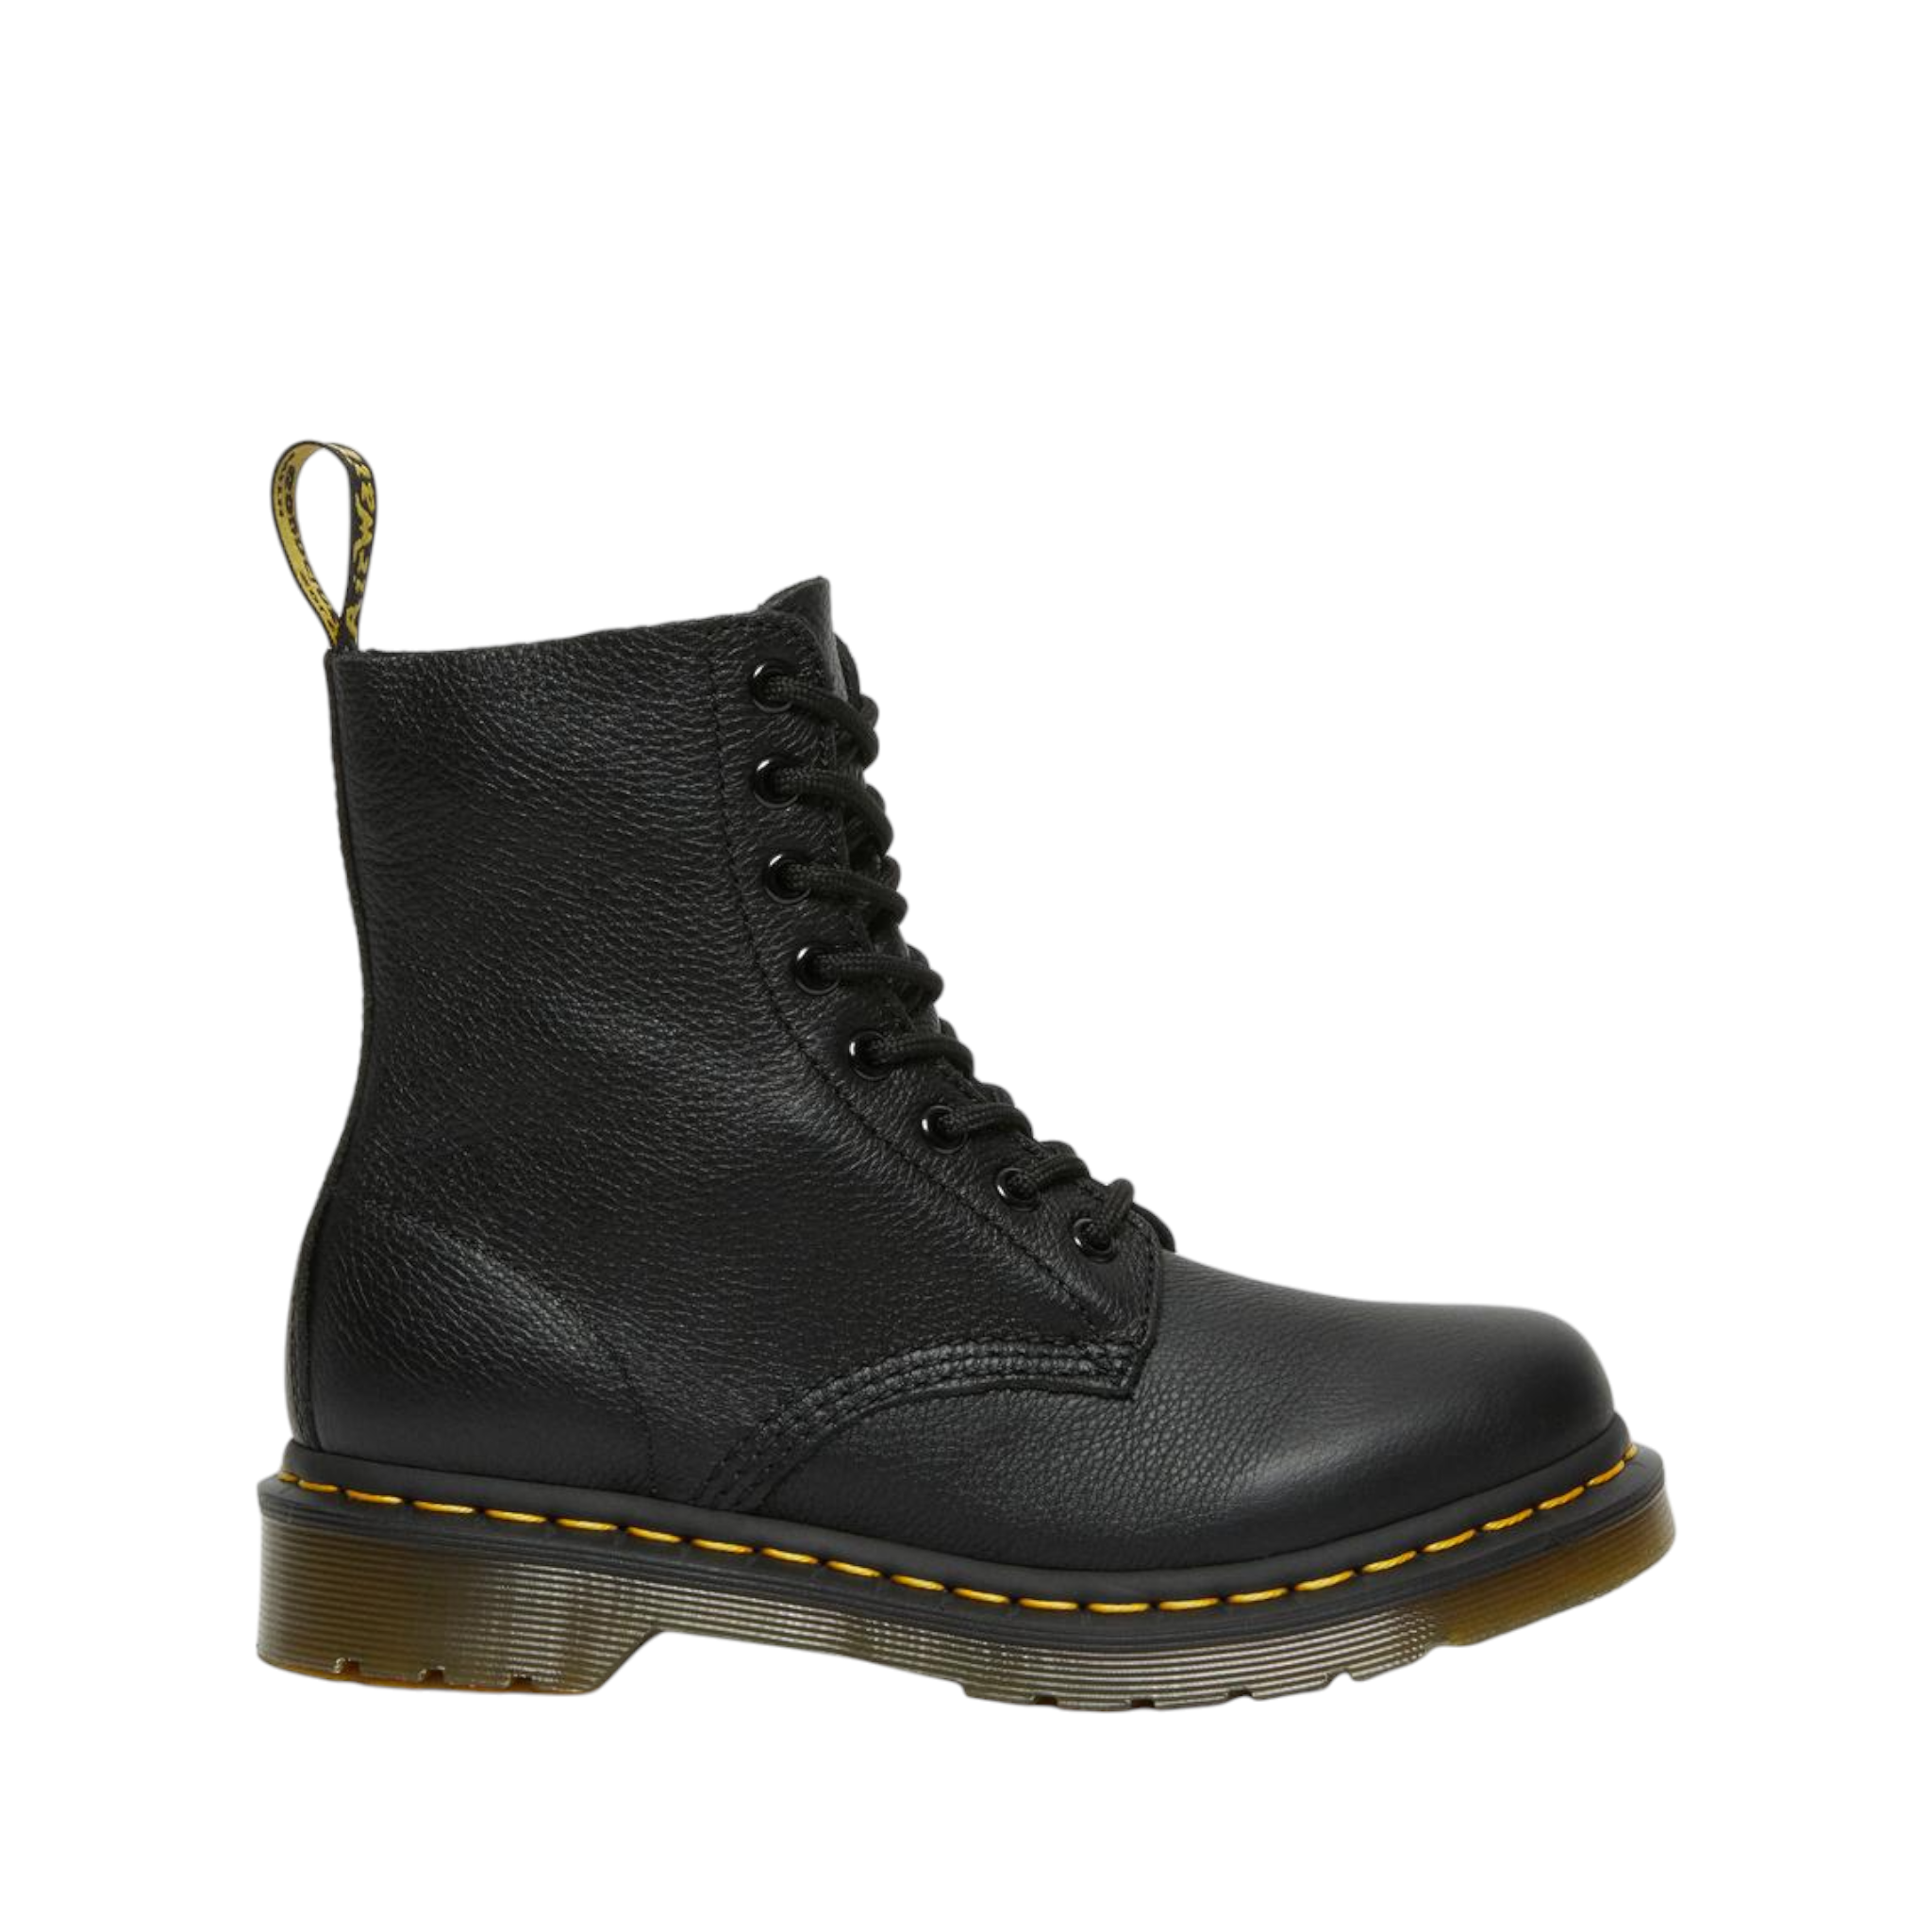 Shop Pascal 8 Eye Dr Martens - with shoe&me - from Dr. Martens - Boots - Boot, Summer, Winter, Womens - [collection]